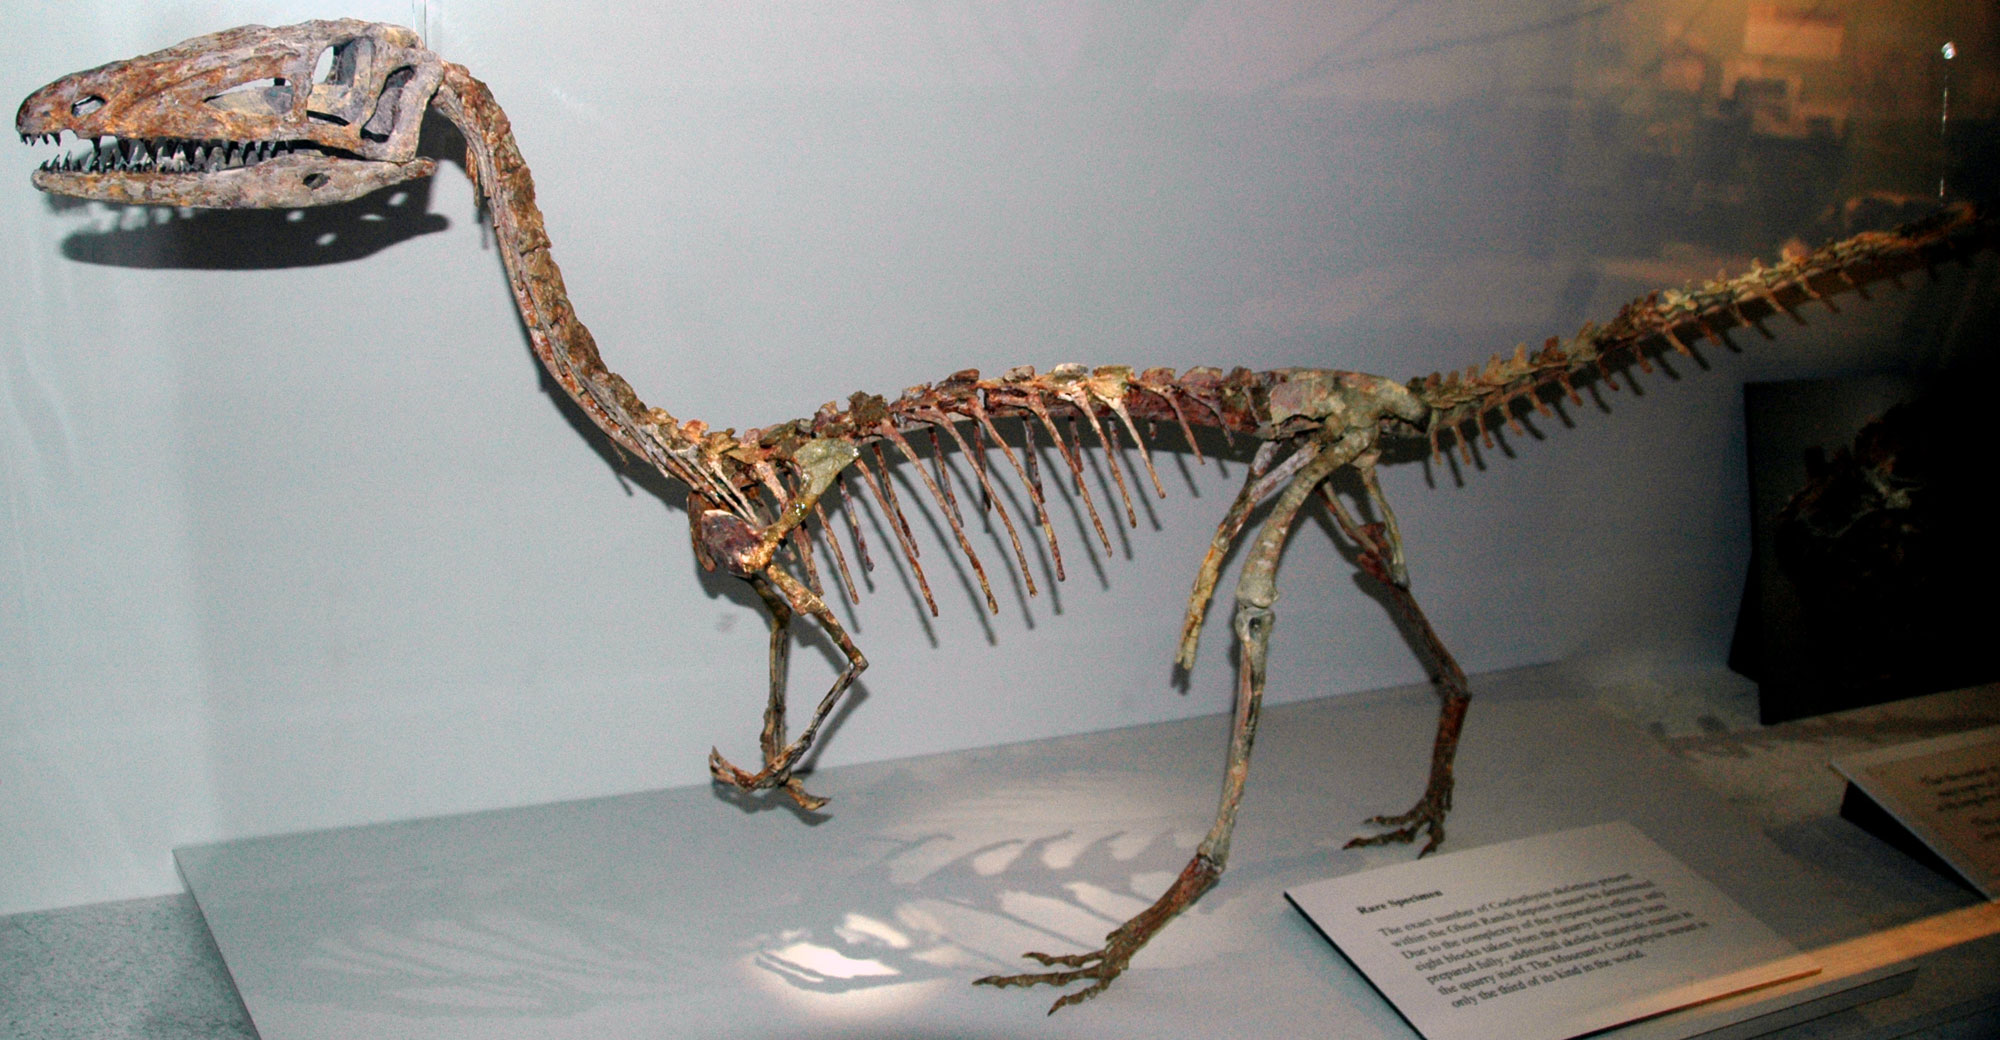 Photograph of a mounted skeleton of Coelophysis baueri. The dinosaur is bipedal (walks on two legs), has shorter arms, a long neck, and a slightly elongated skull with small, pointed teeth. The tail extends horizontally from the body and does not rest on the ground. The feet have three large toes.